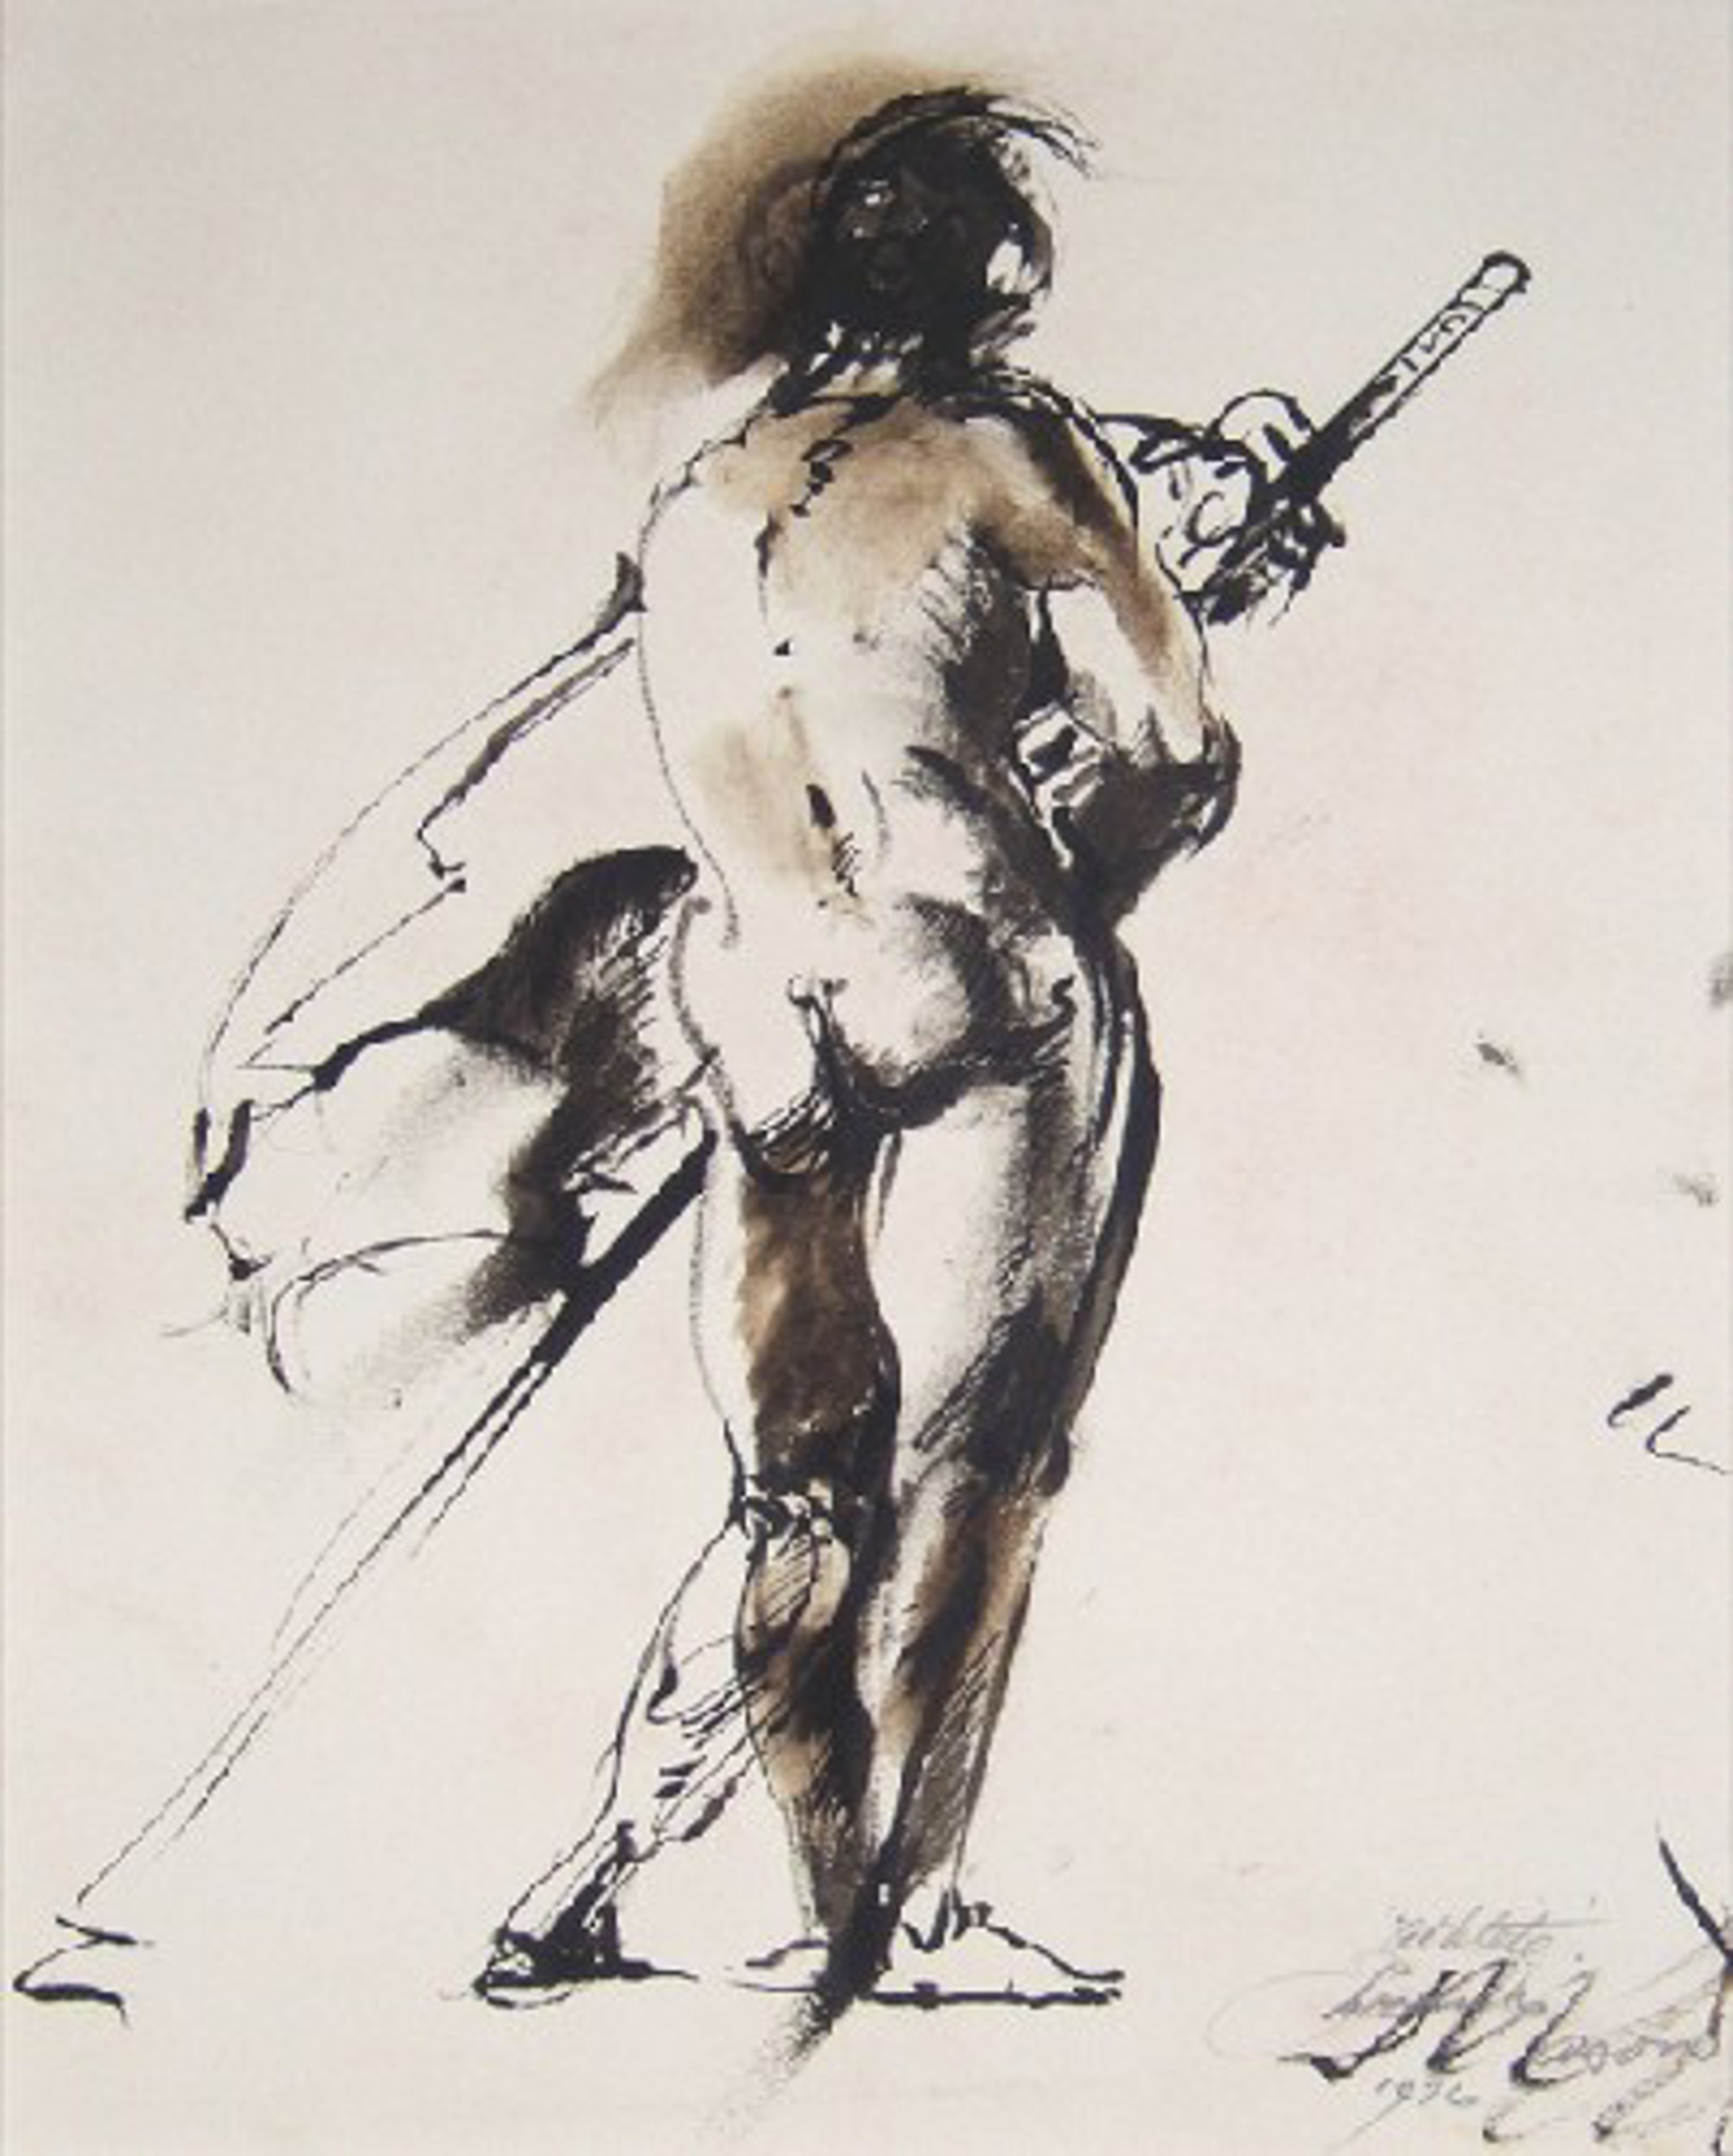 Athlete as Soldier by Frank Mason (1921 - 2009)